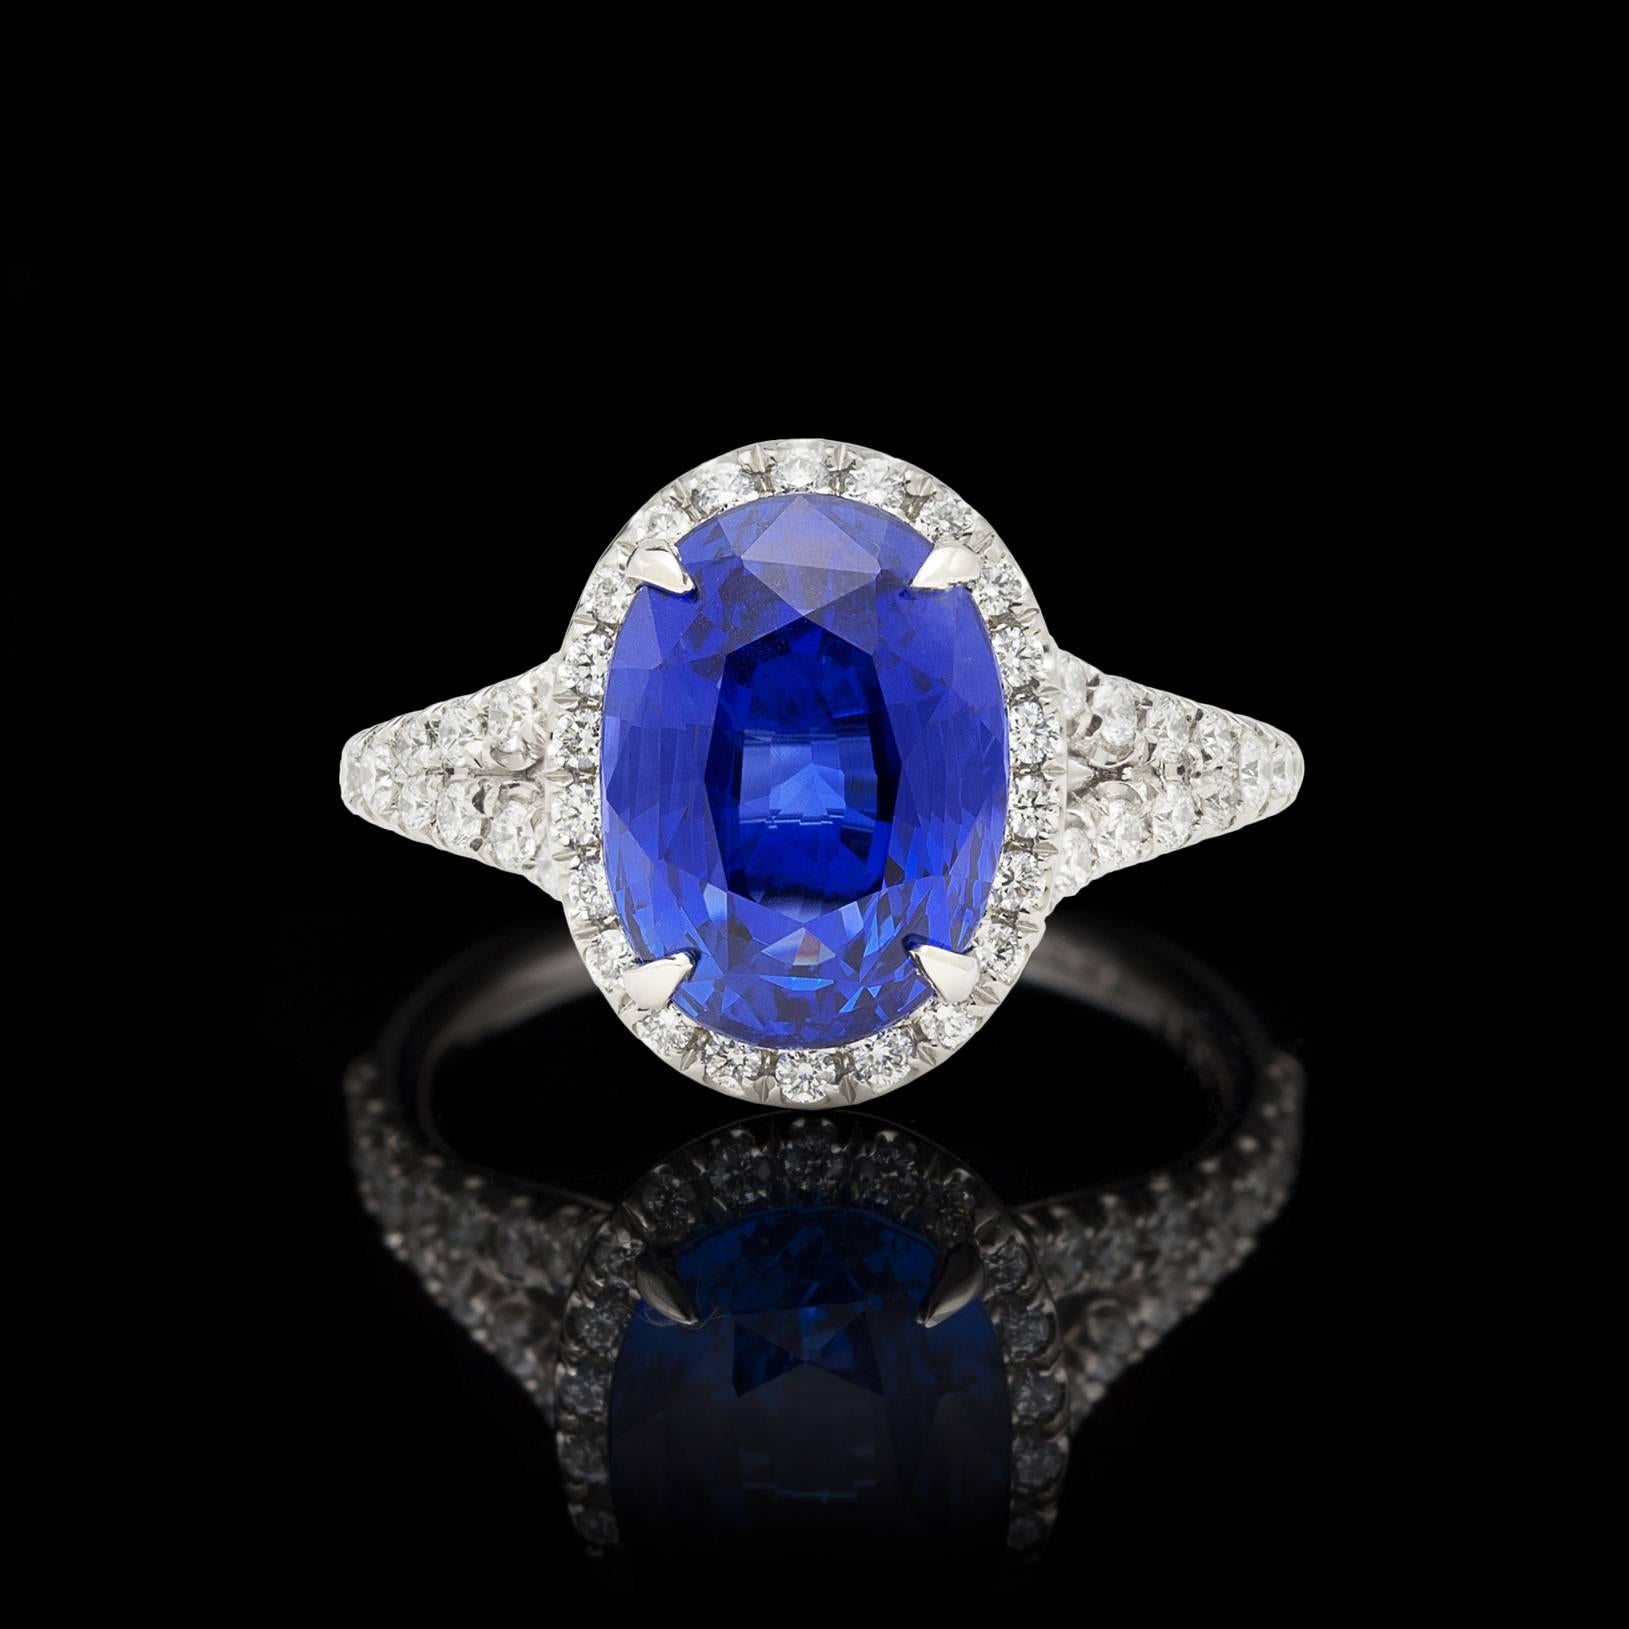 There's blue, and then there is BLUE! This AGL graded Unheated Oval Blue Sapphire sets the standard for how a Natural Blue Sapphire should look. With exceptional light return and rich saturation of color, this 5.08 carat stunner jumps with vibrant